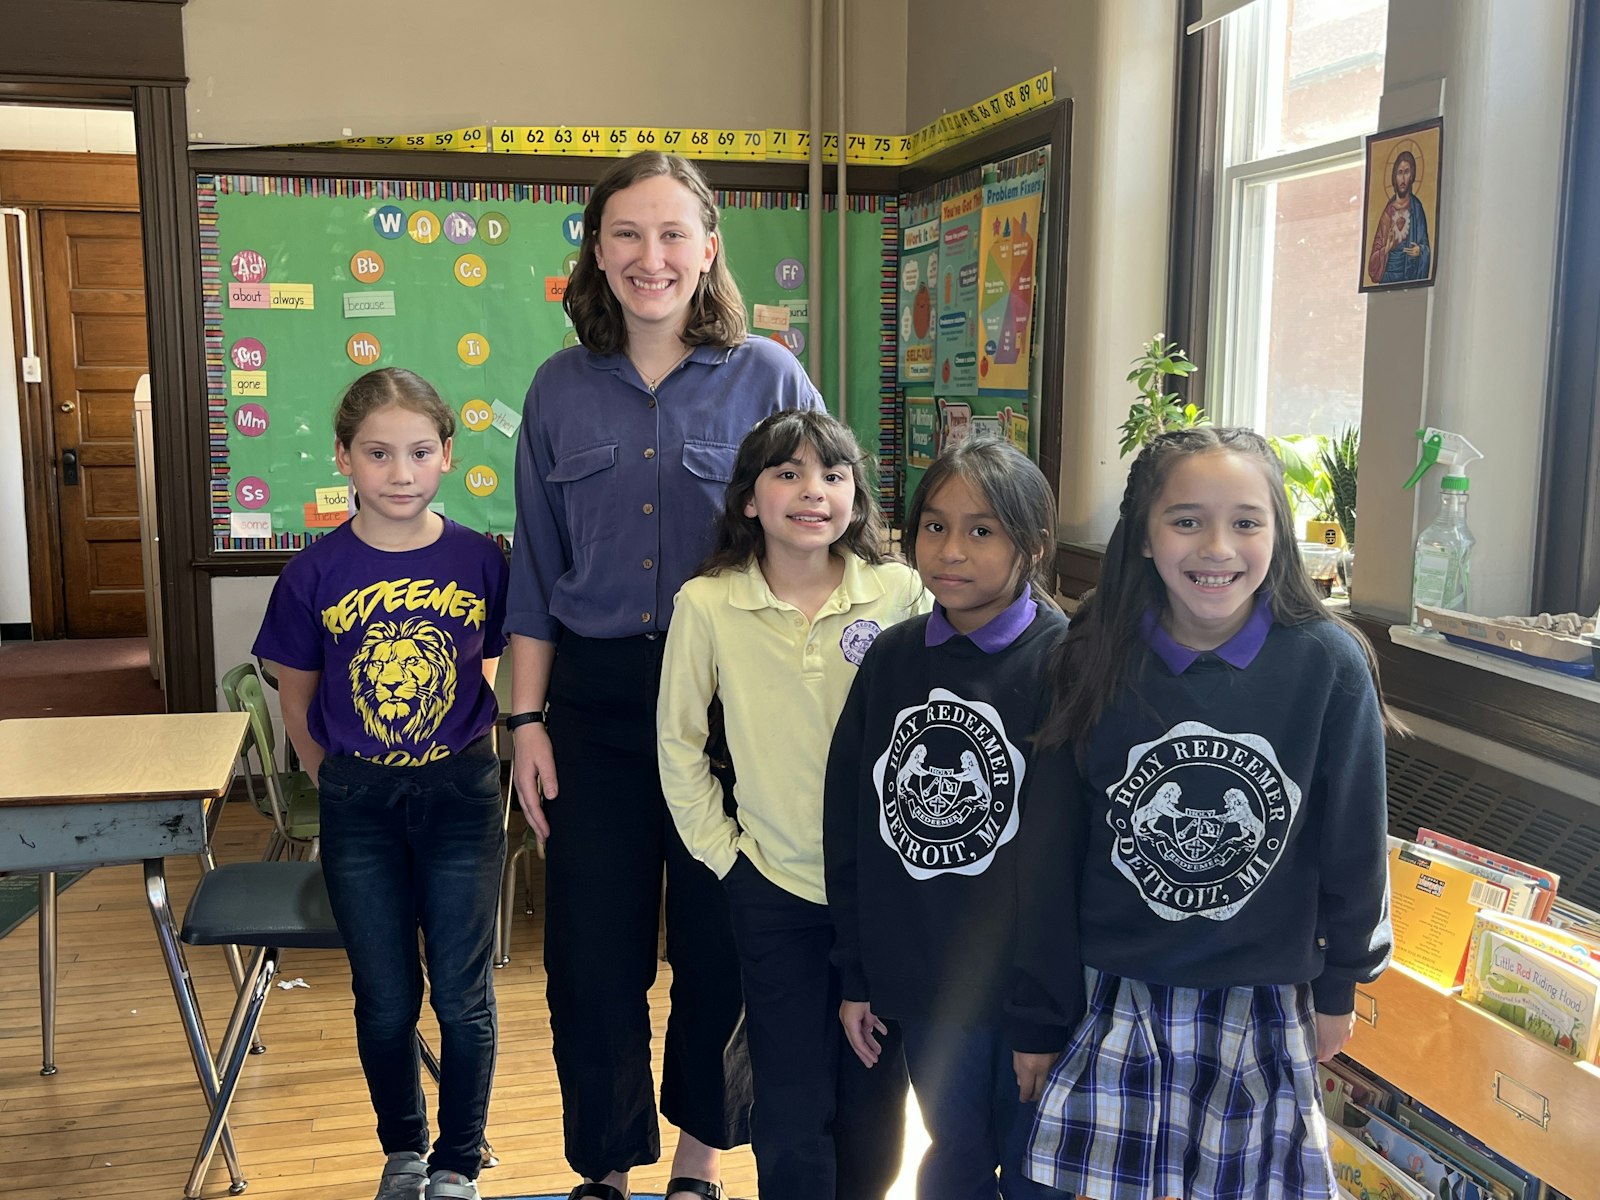 Sarah Niekamp volunteers as a teacher’s aide for the third-grade class at Holy Redeemer School. She is one of four young women on the SOLT missionary volunteer team for Detroit.